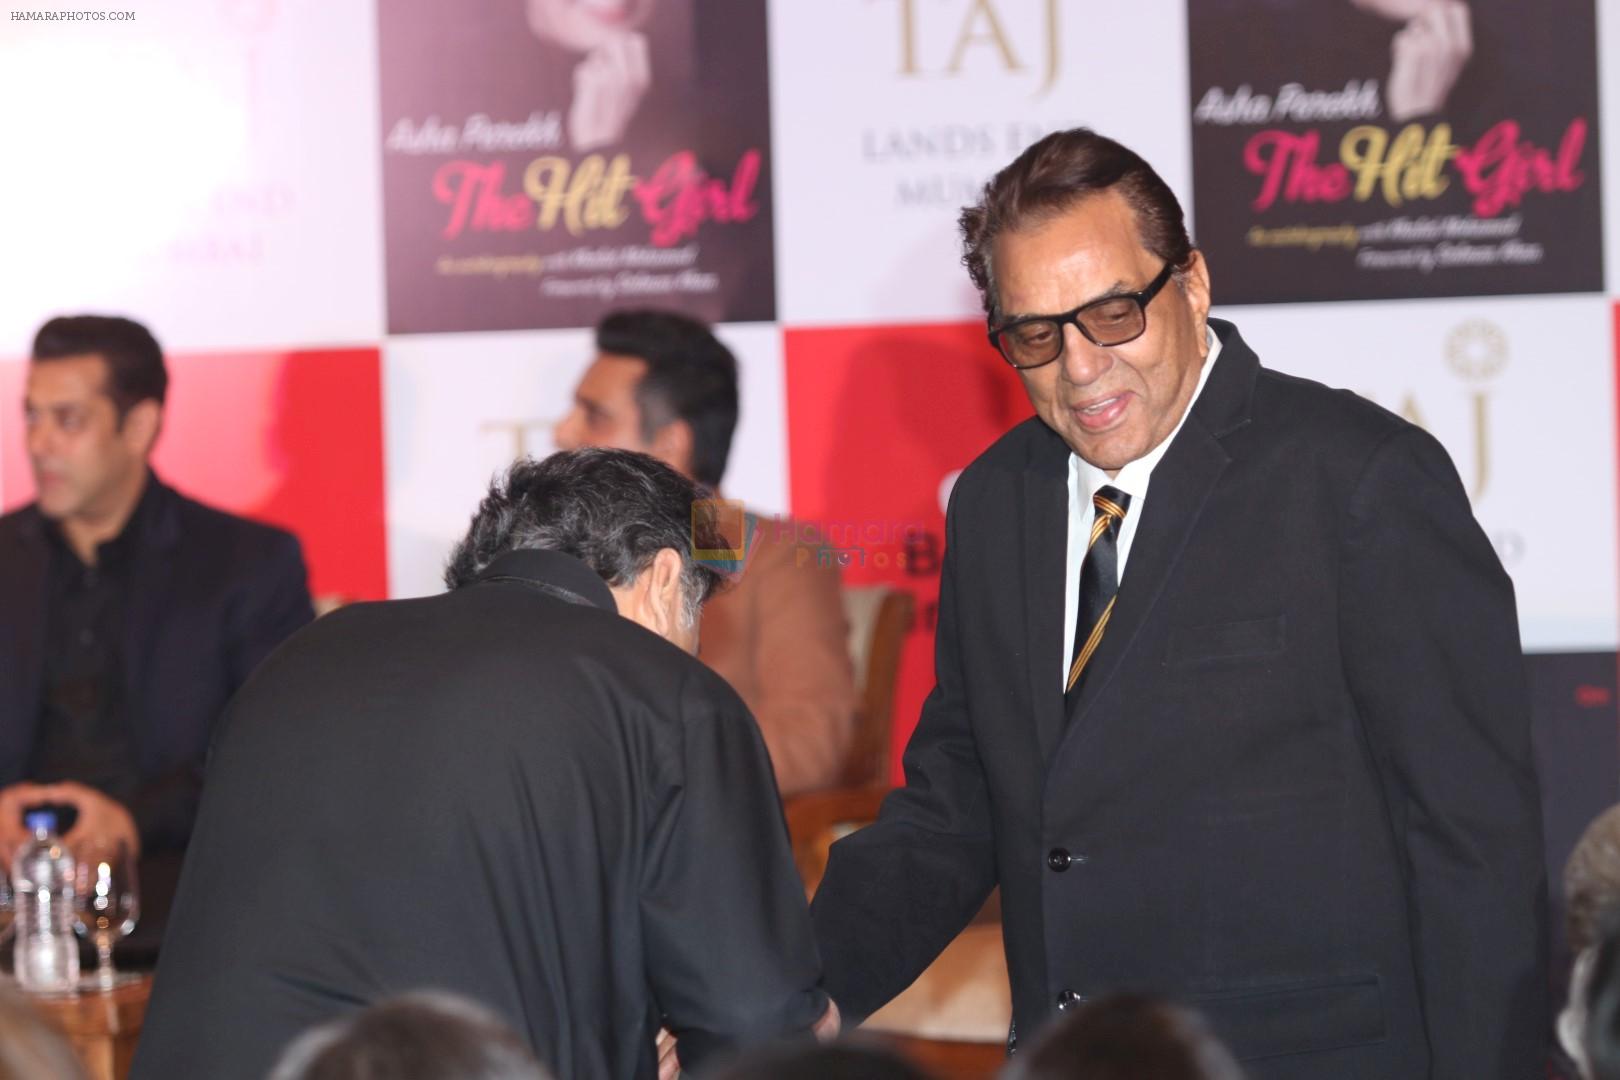 Dharmendra at the Unveiling Of Asha Parekh Autobiography